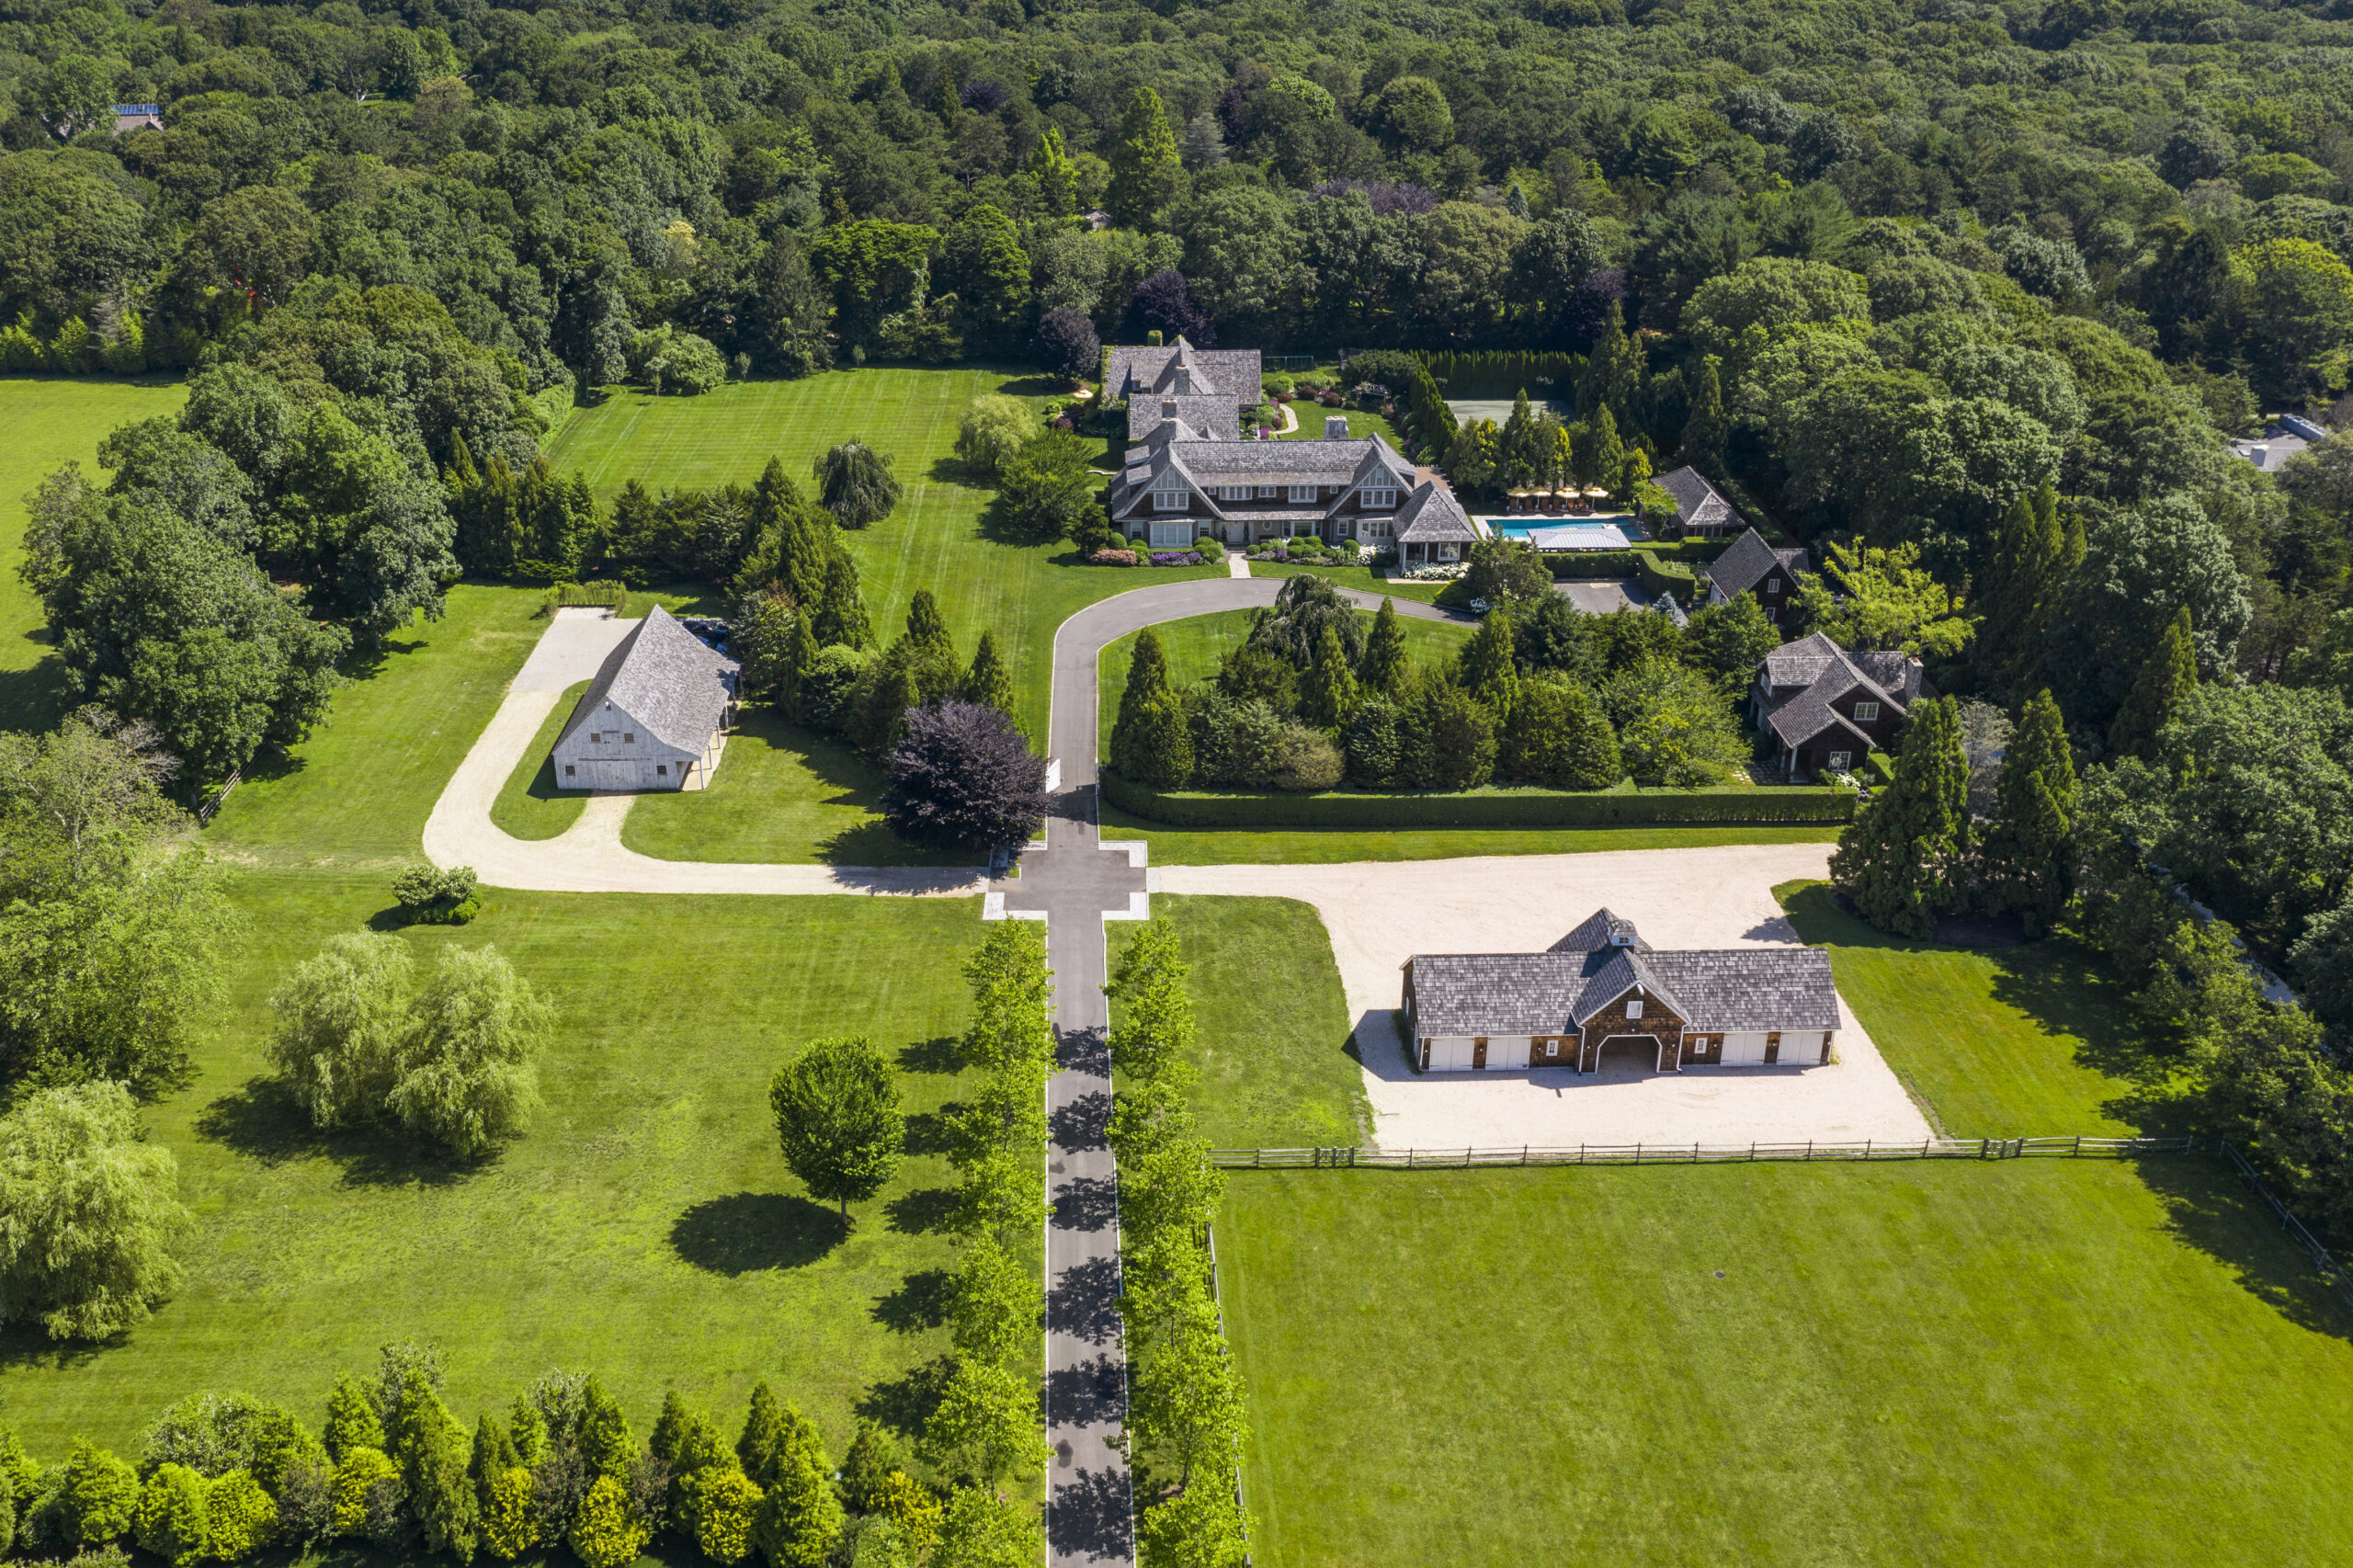 The Cedar Street 21.8-acre compound in East Hampton recently sold for 22.7 million. COURTESY SOTHEBY'S INTERNATIONAL REALTY